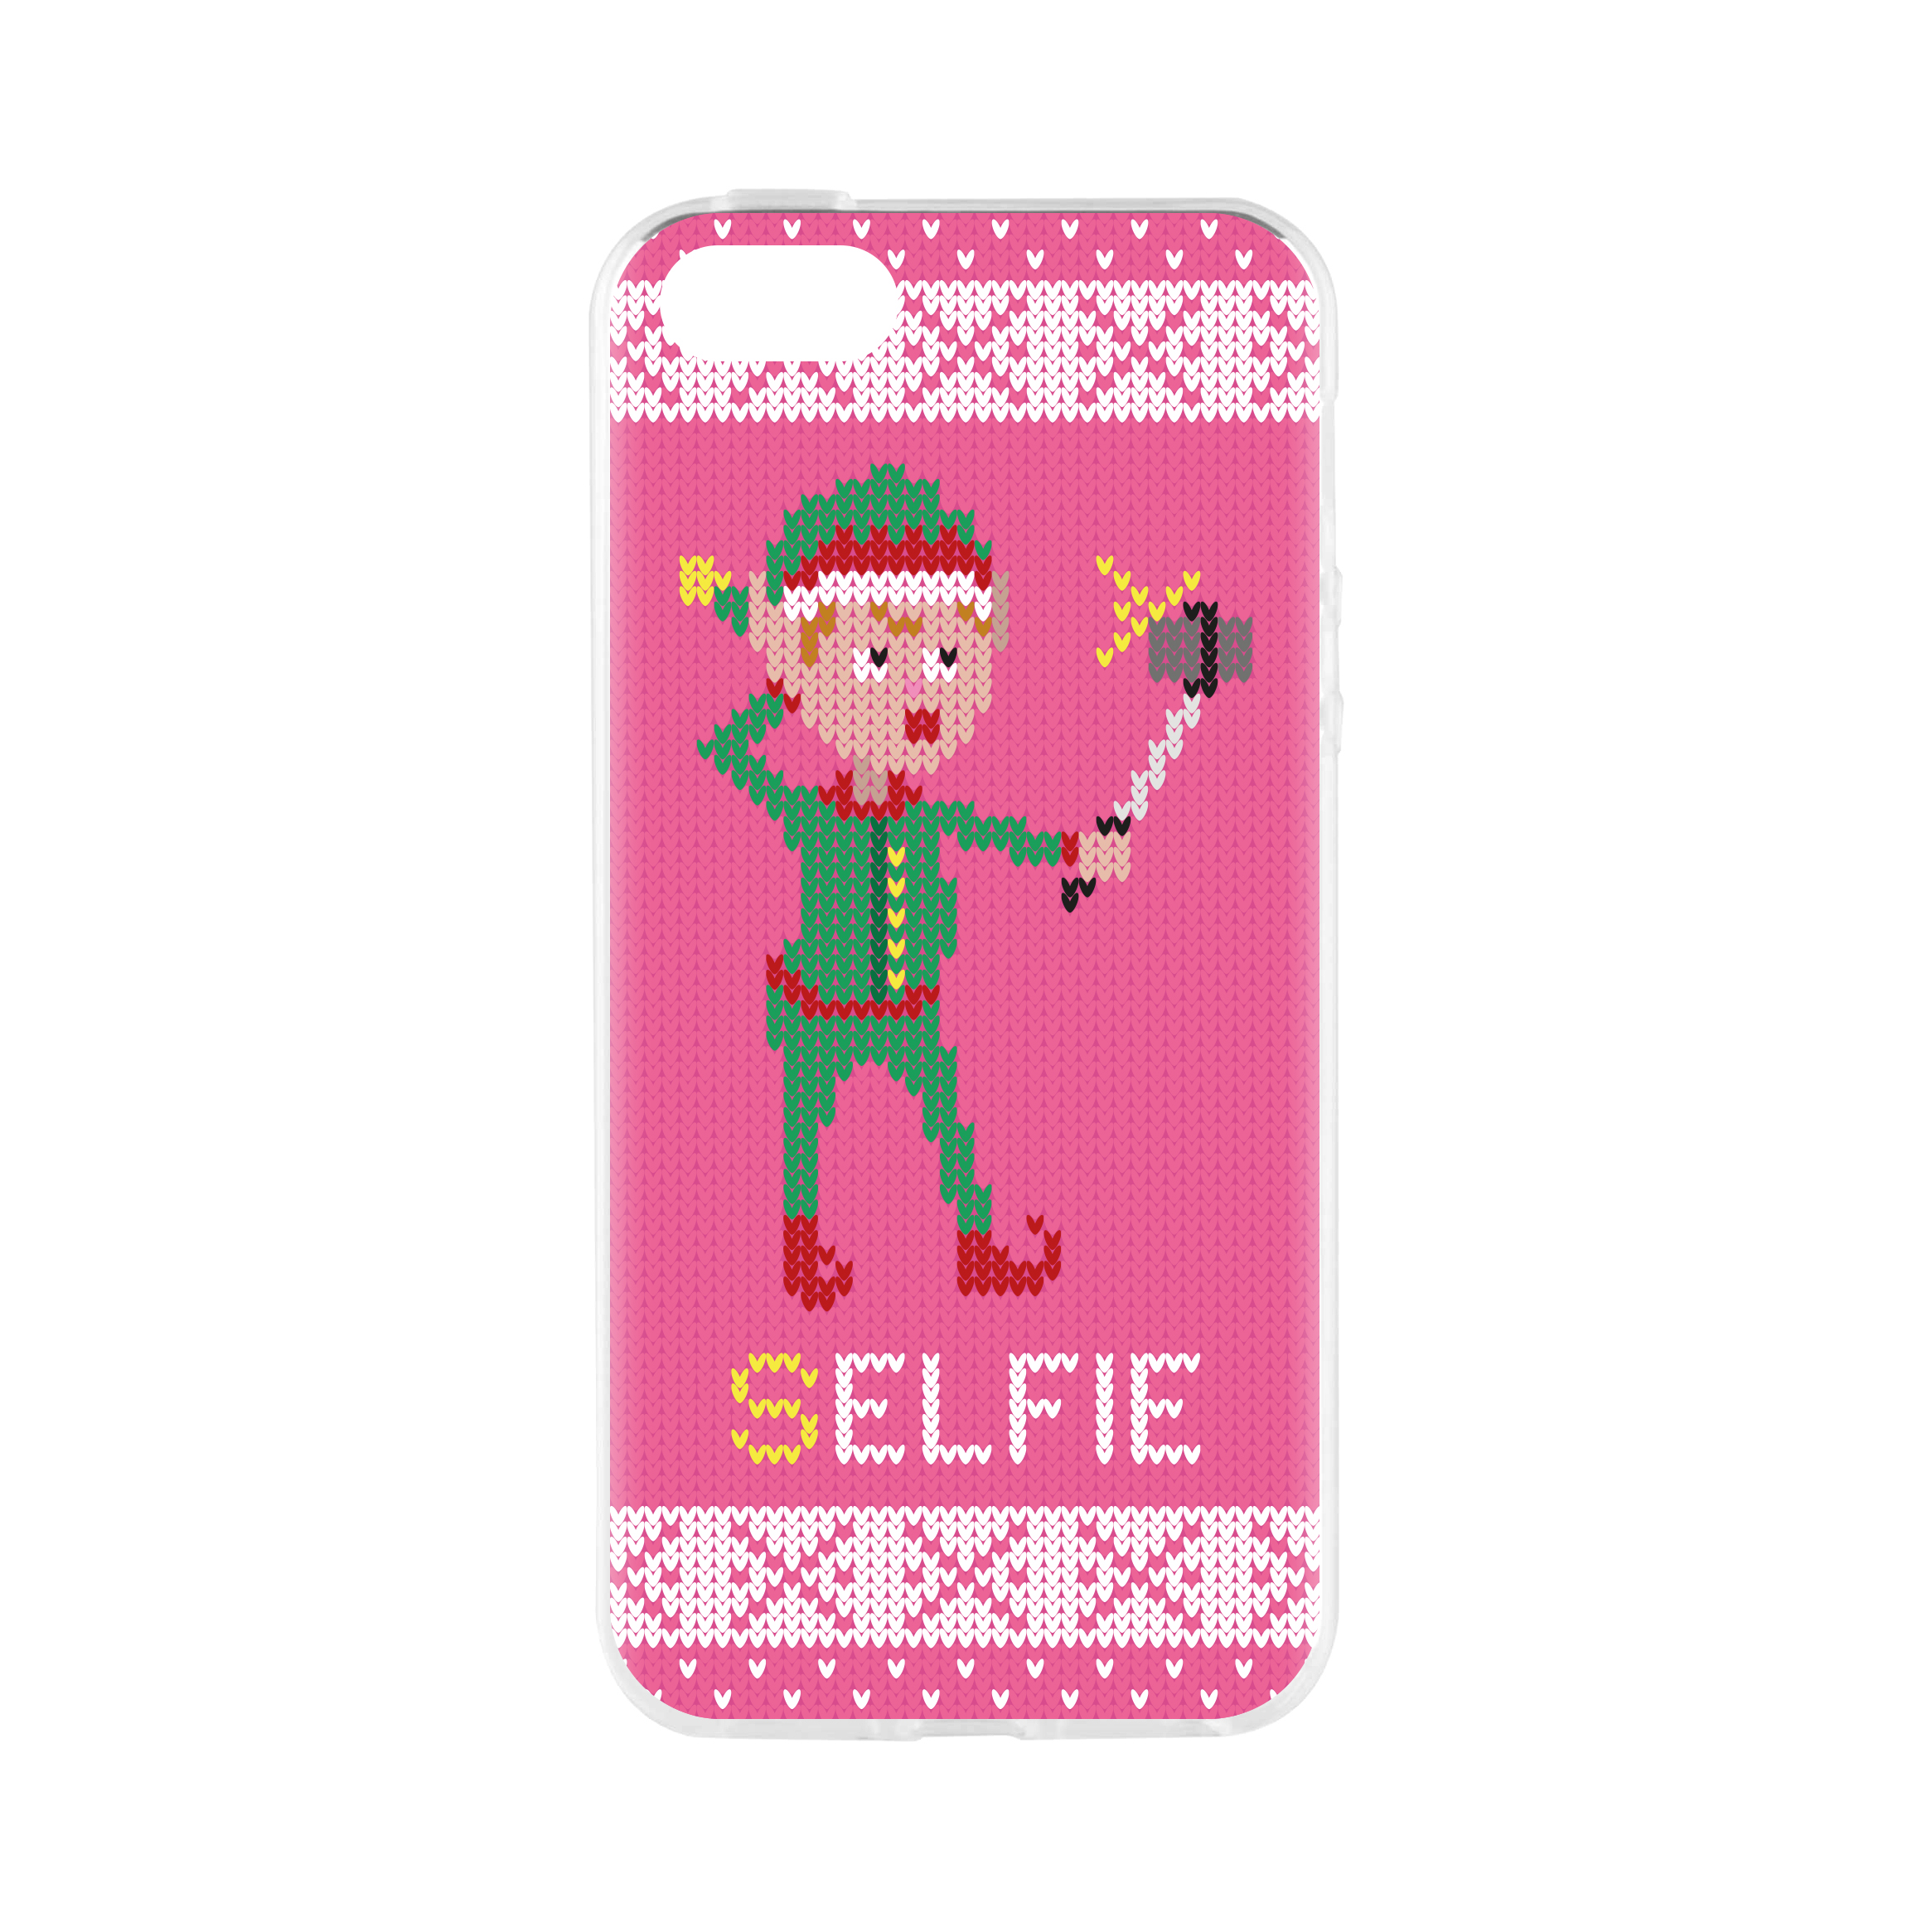 FLAVR Case Ugly Xmas Sweater APPLE, Elfie, Selfie Backcover, COLOURFUL 5/5S/SE, IPHONE